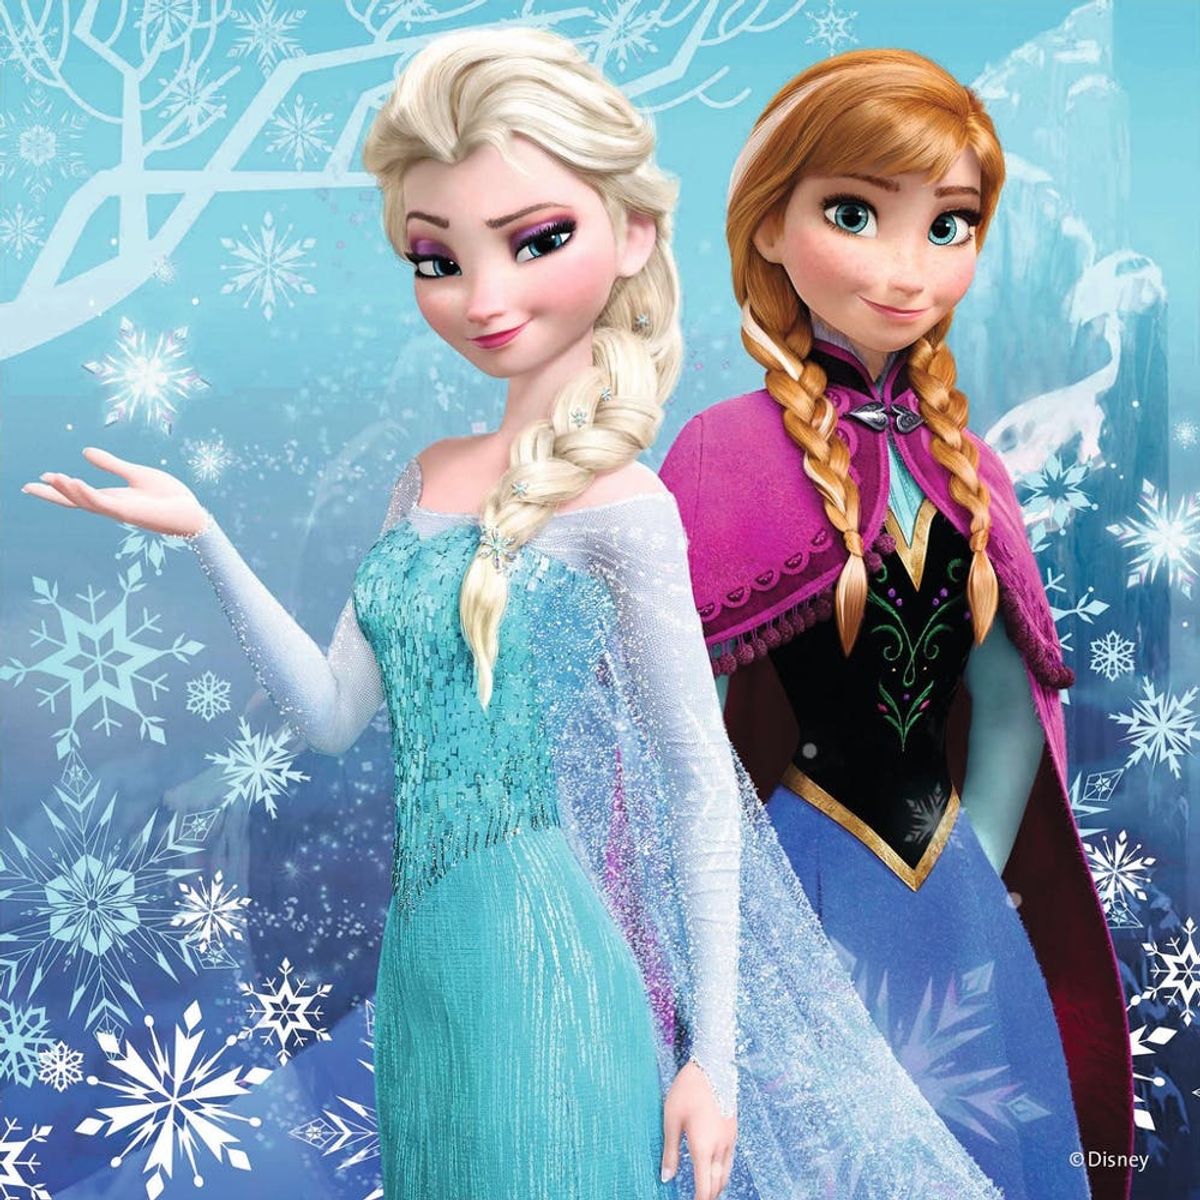 Confirmed! Tarzan’s Sisters Are Anna and Elsa from Frozen